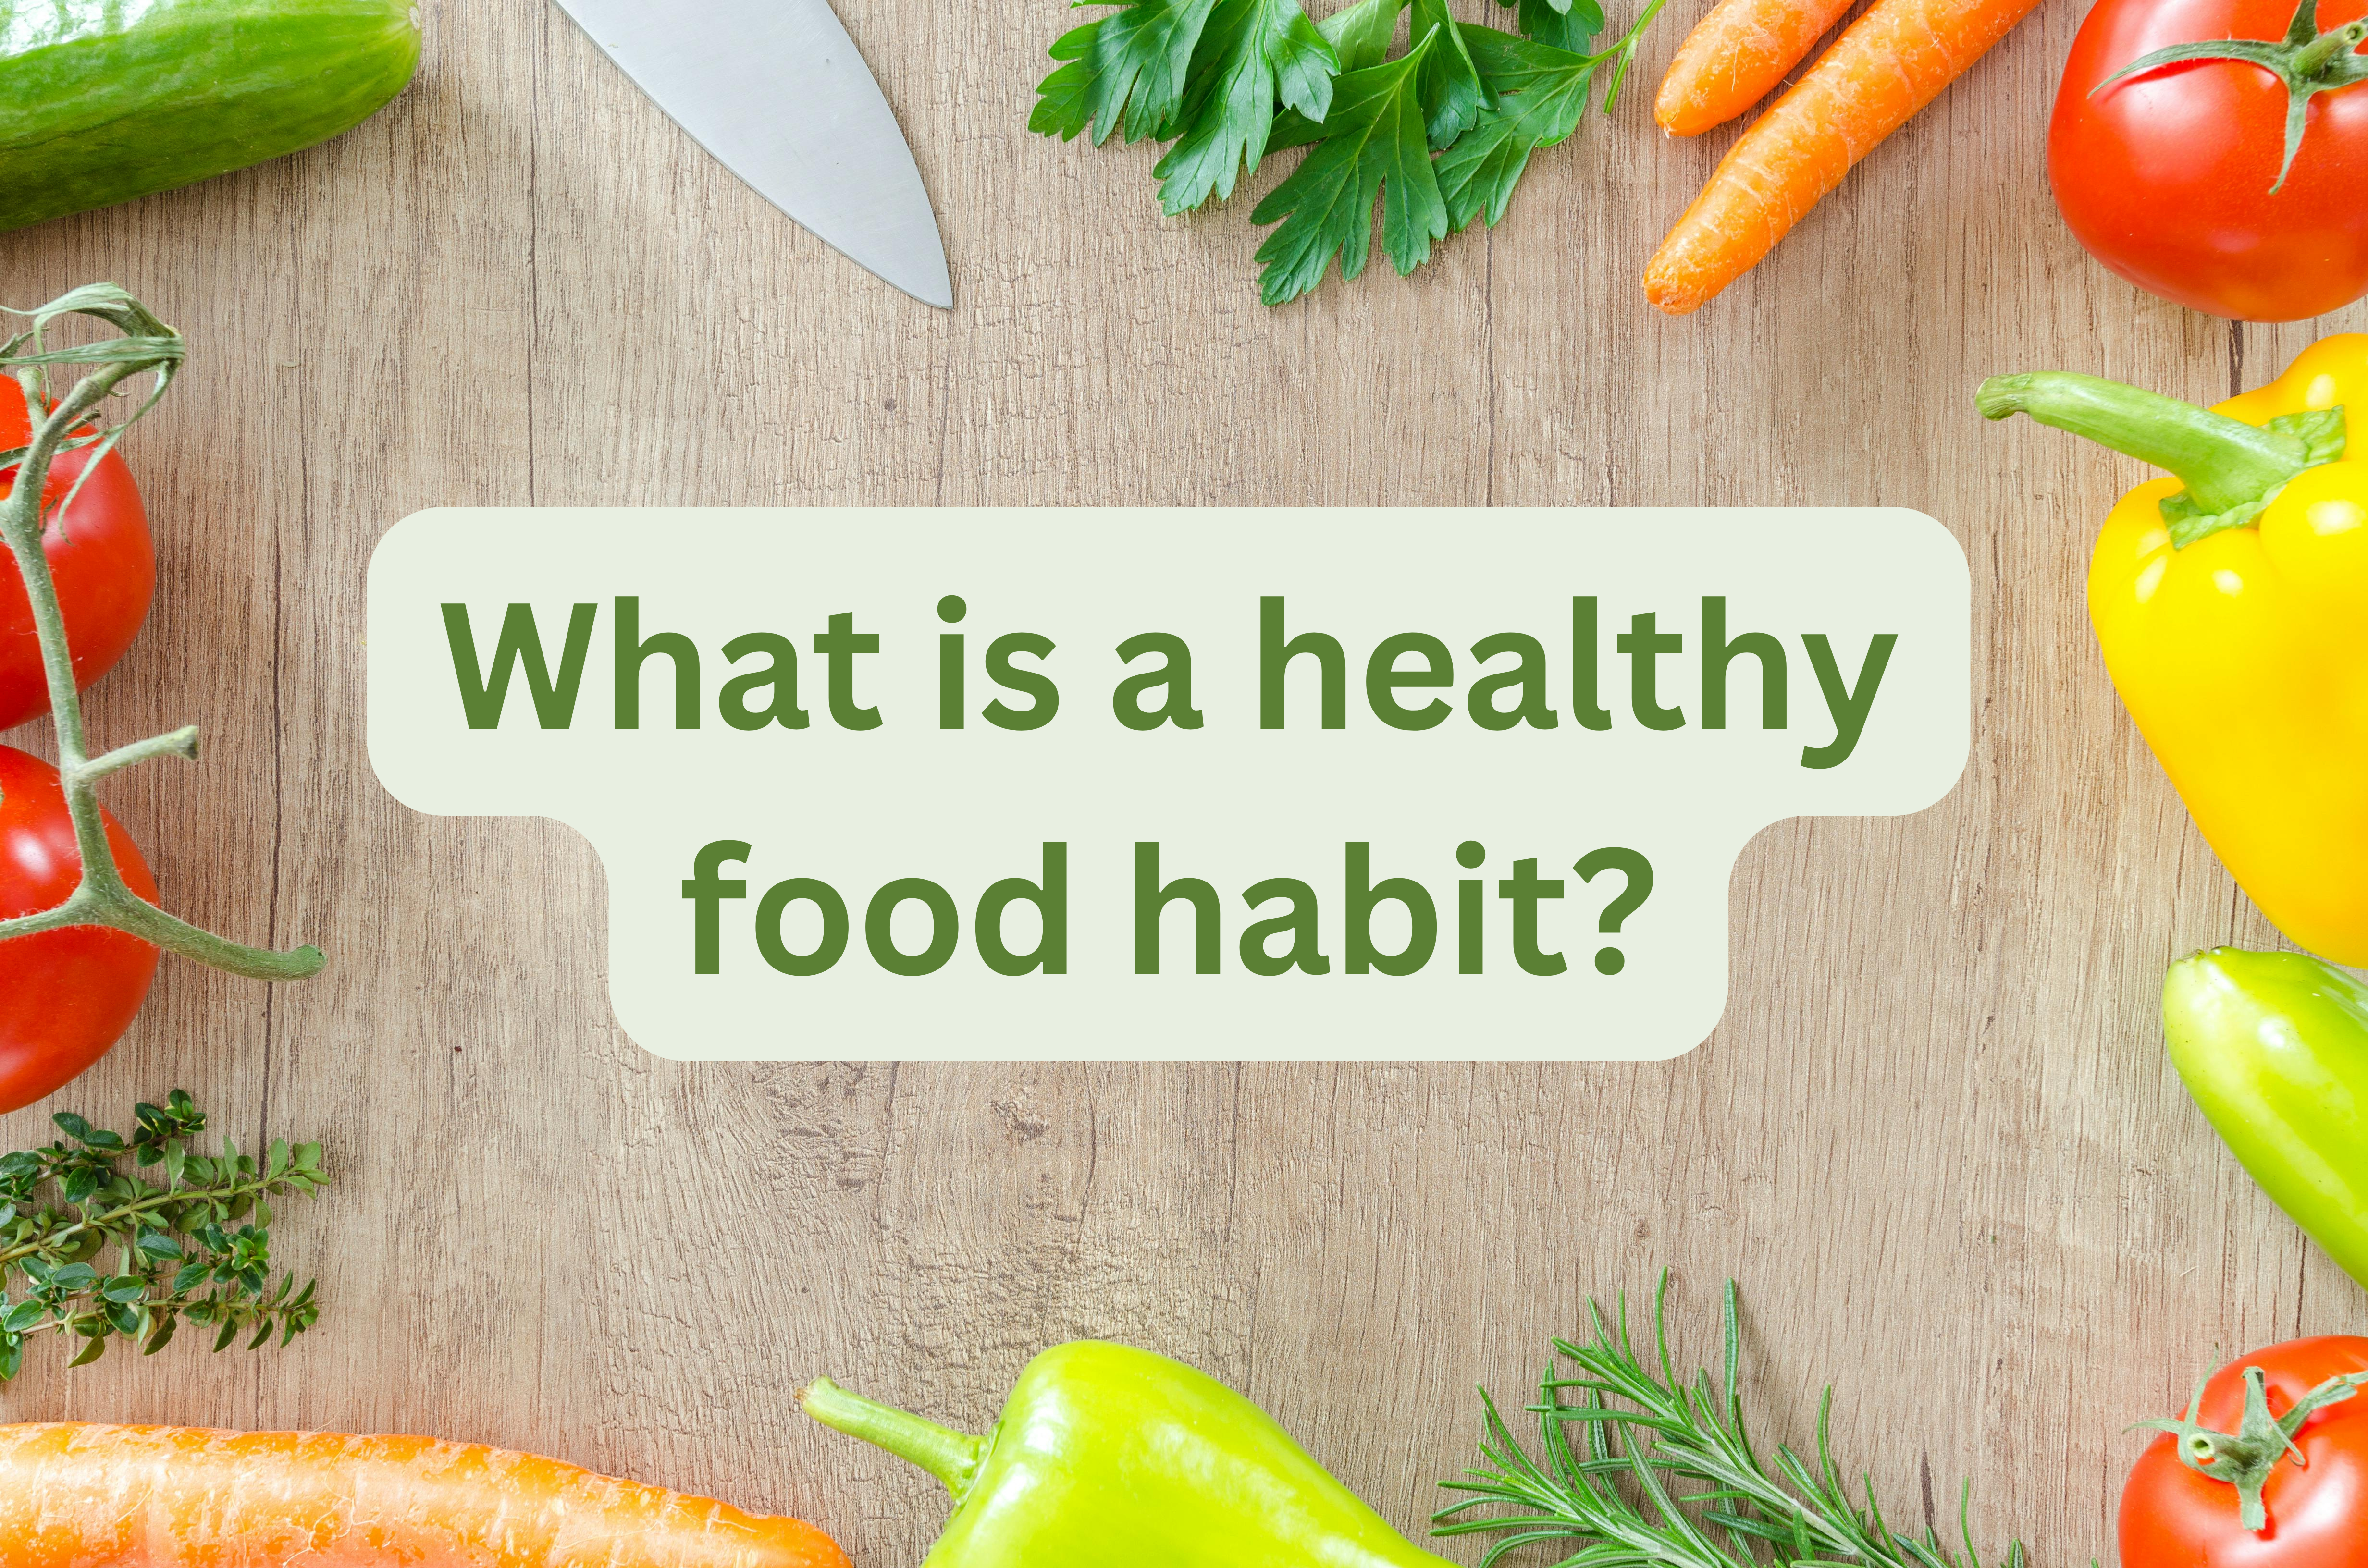 What is a healthy food habit?